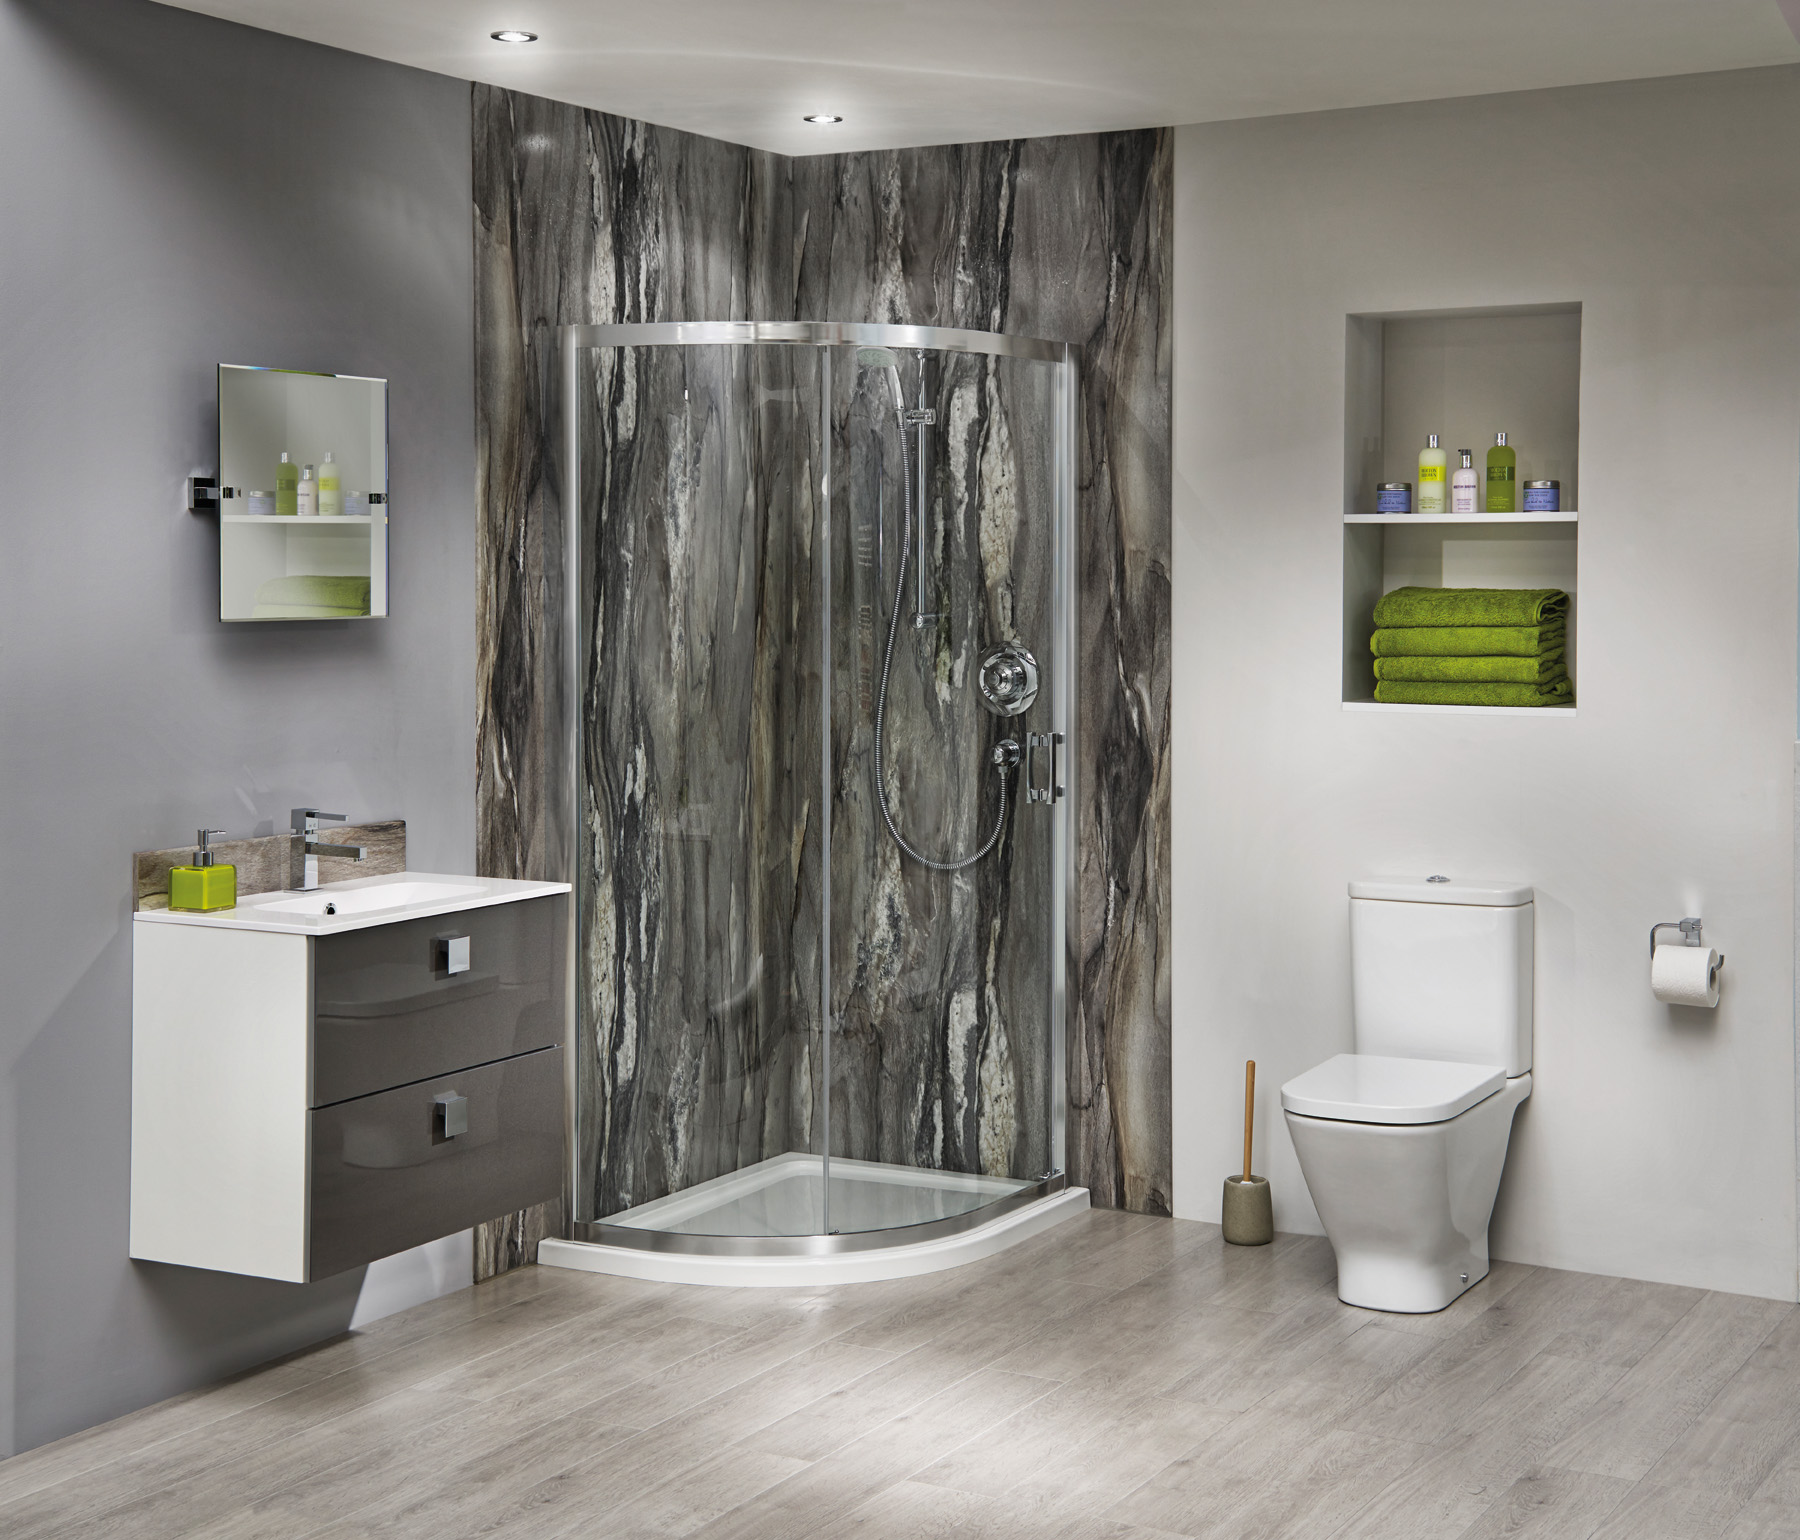 Bushboards Nuance bathroom wall panelling in Dolce Vita 02 LS LR